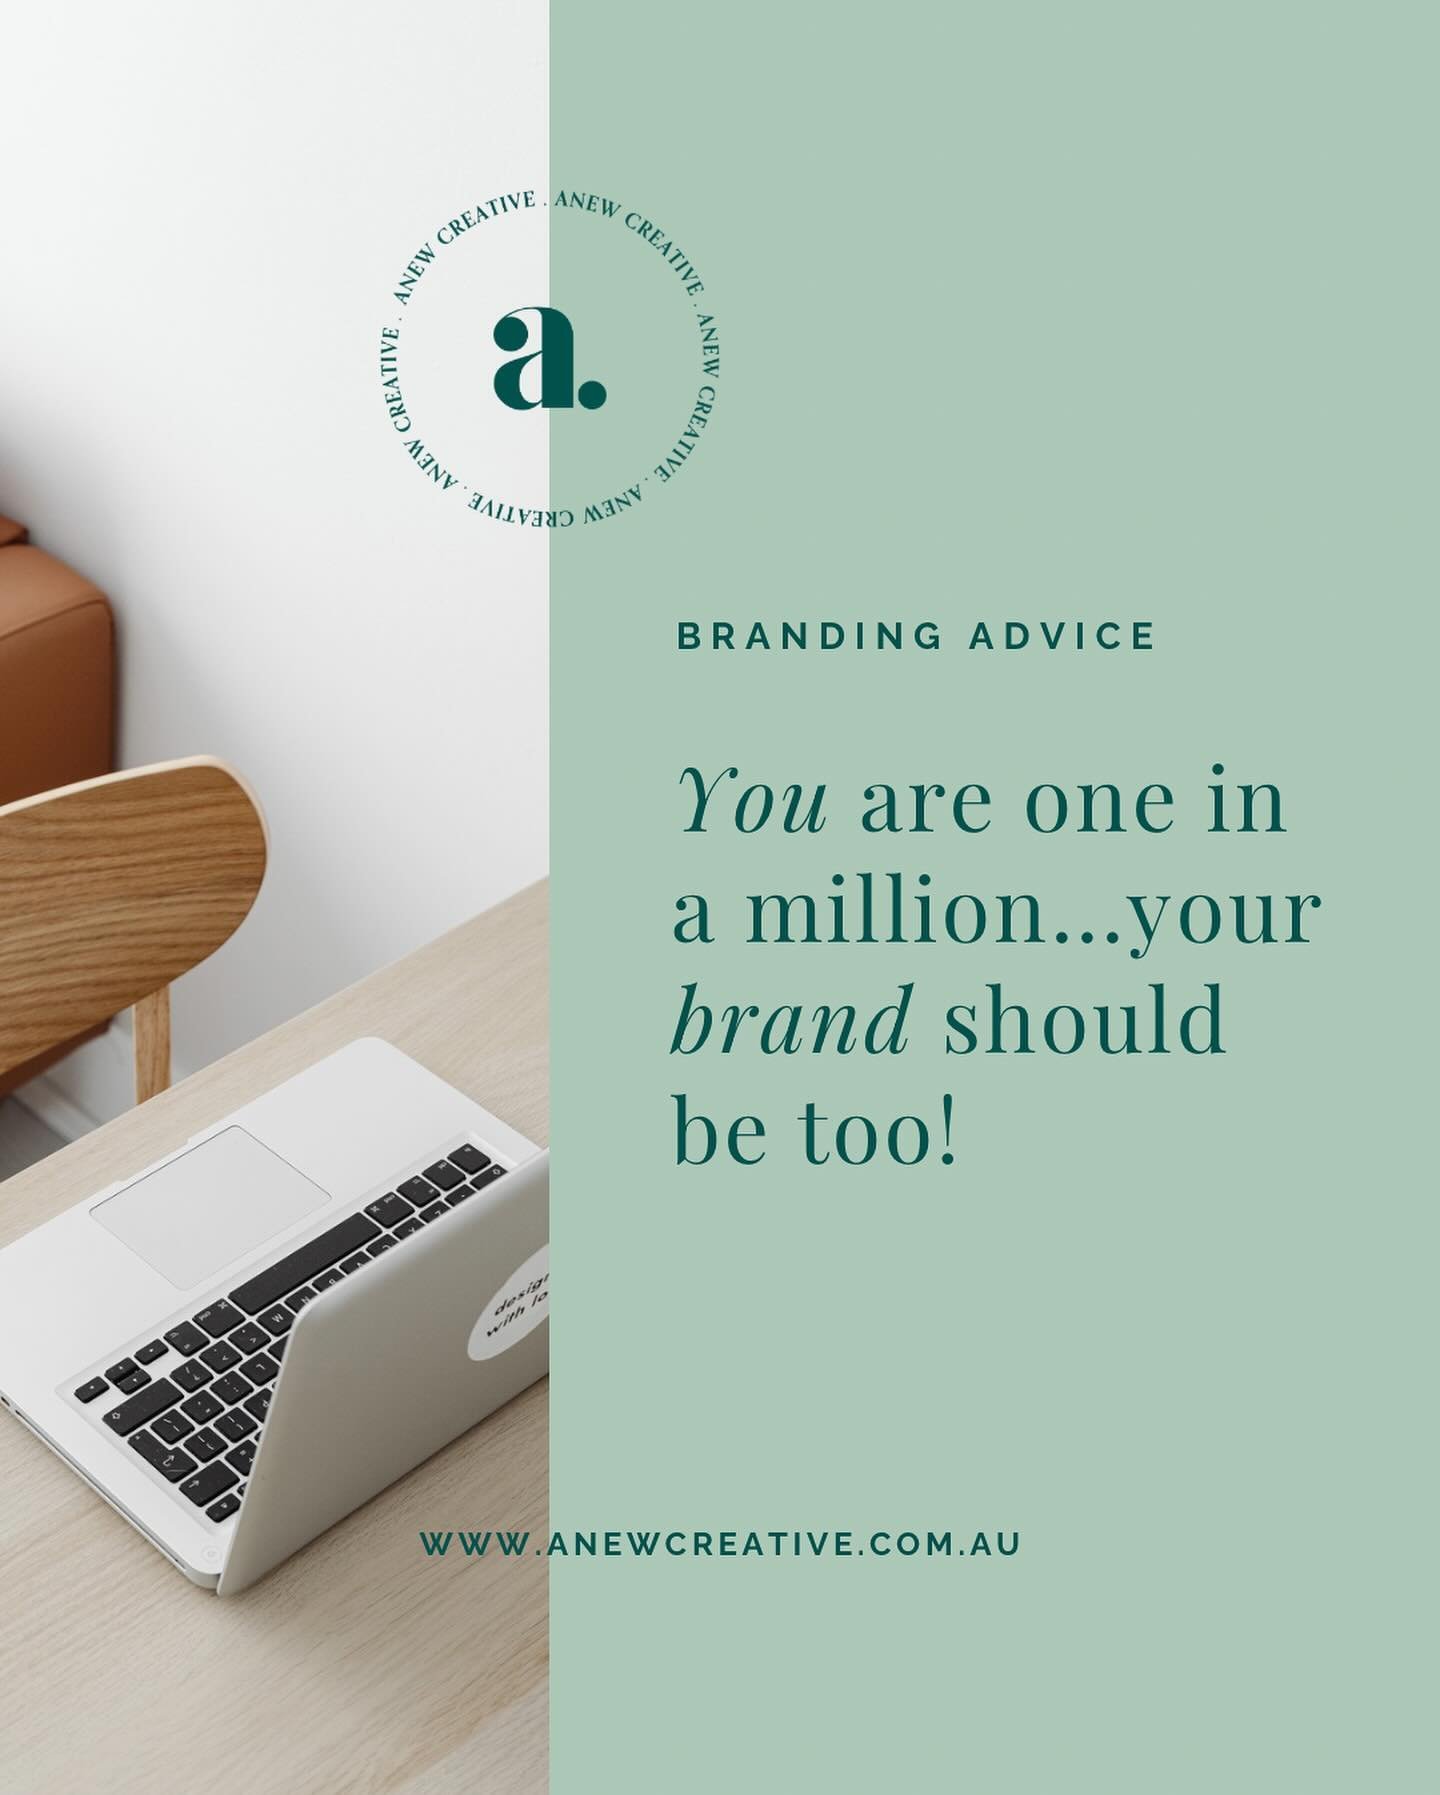 Nothing breaks my heart more as a designer than seeing an incredible business settle for cookie-cutter branding 💔 

You pour your heart and soul into your business and your branding should reflect that dedication and expertise!

Your brand could be 